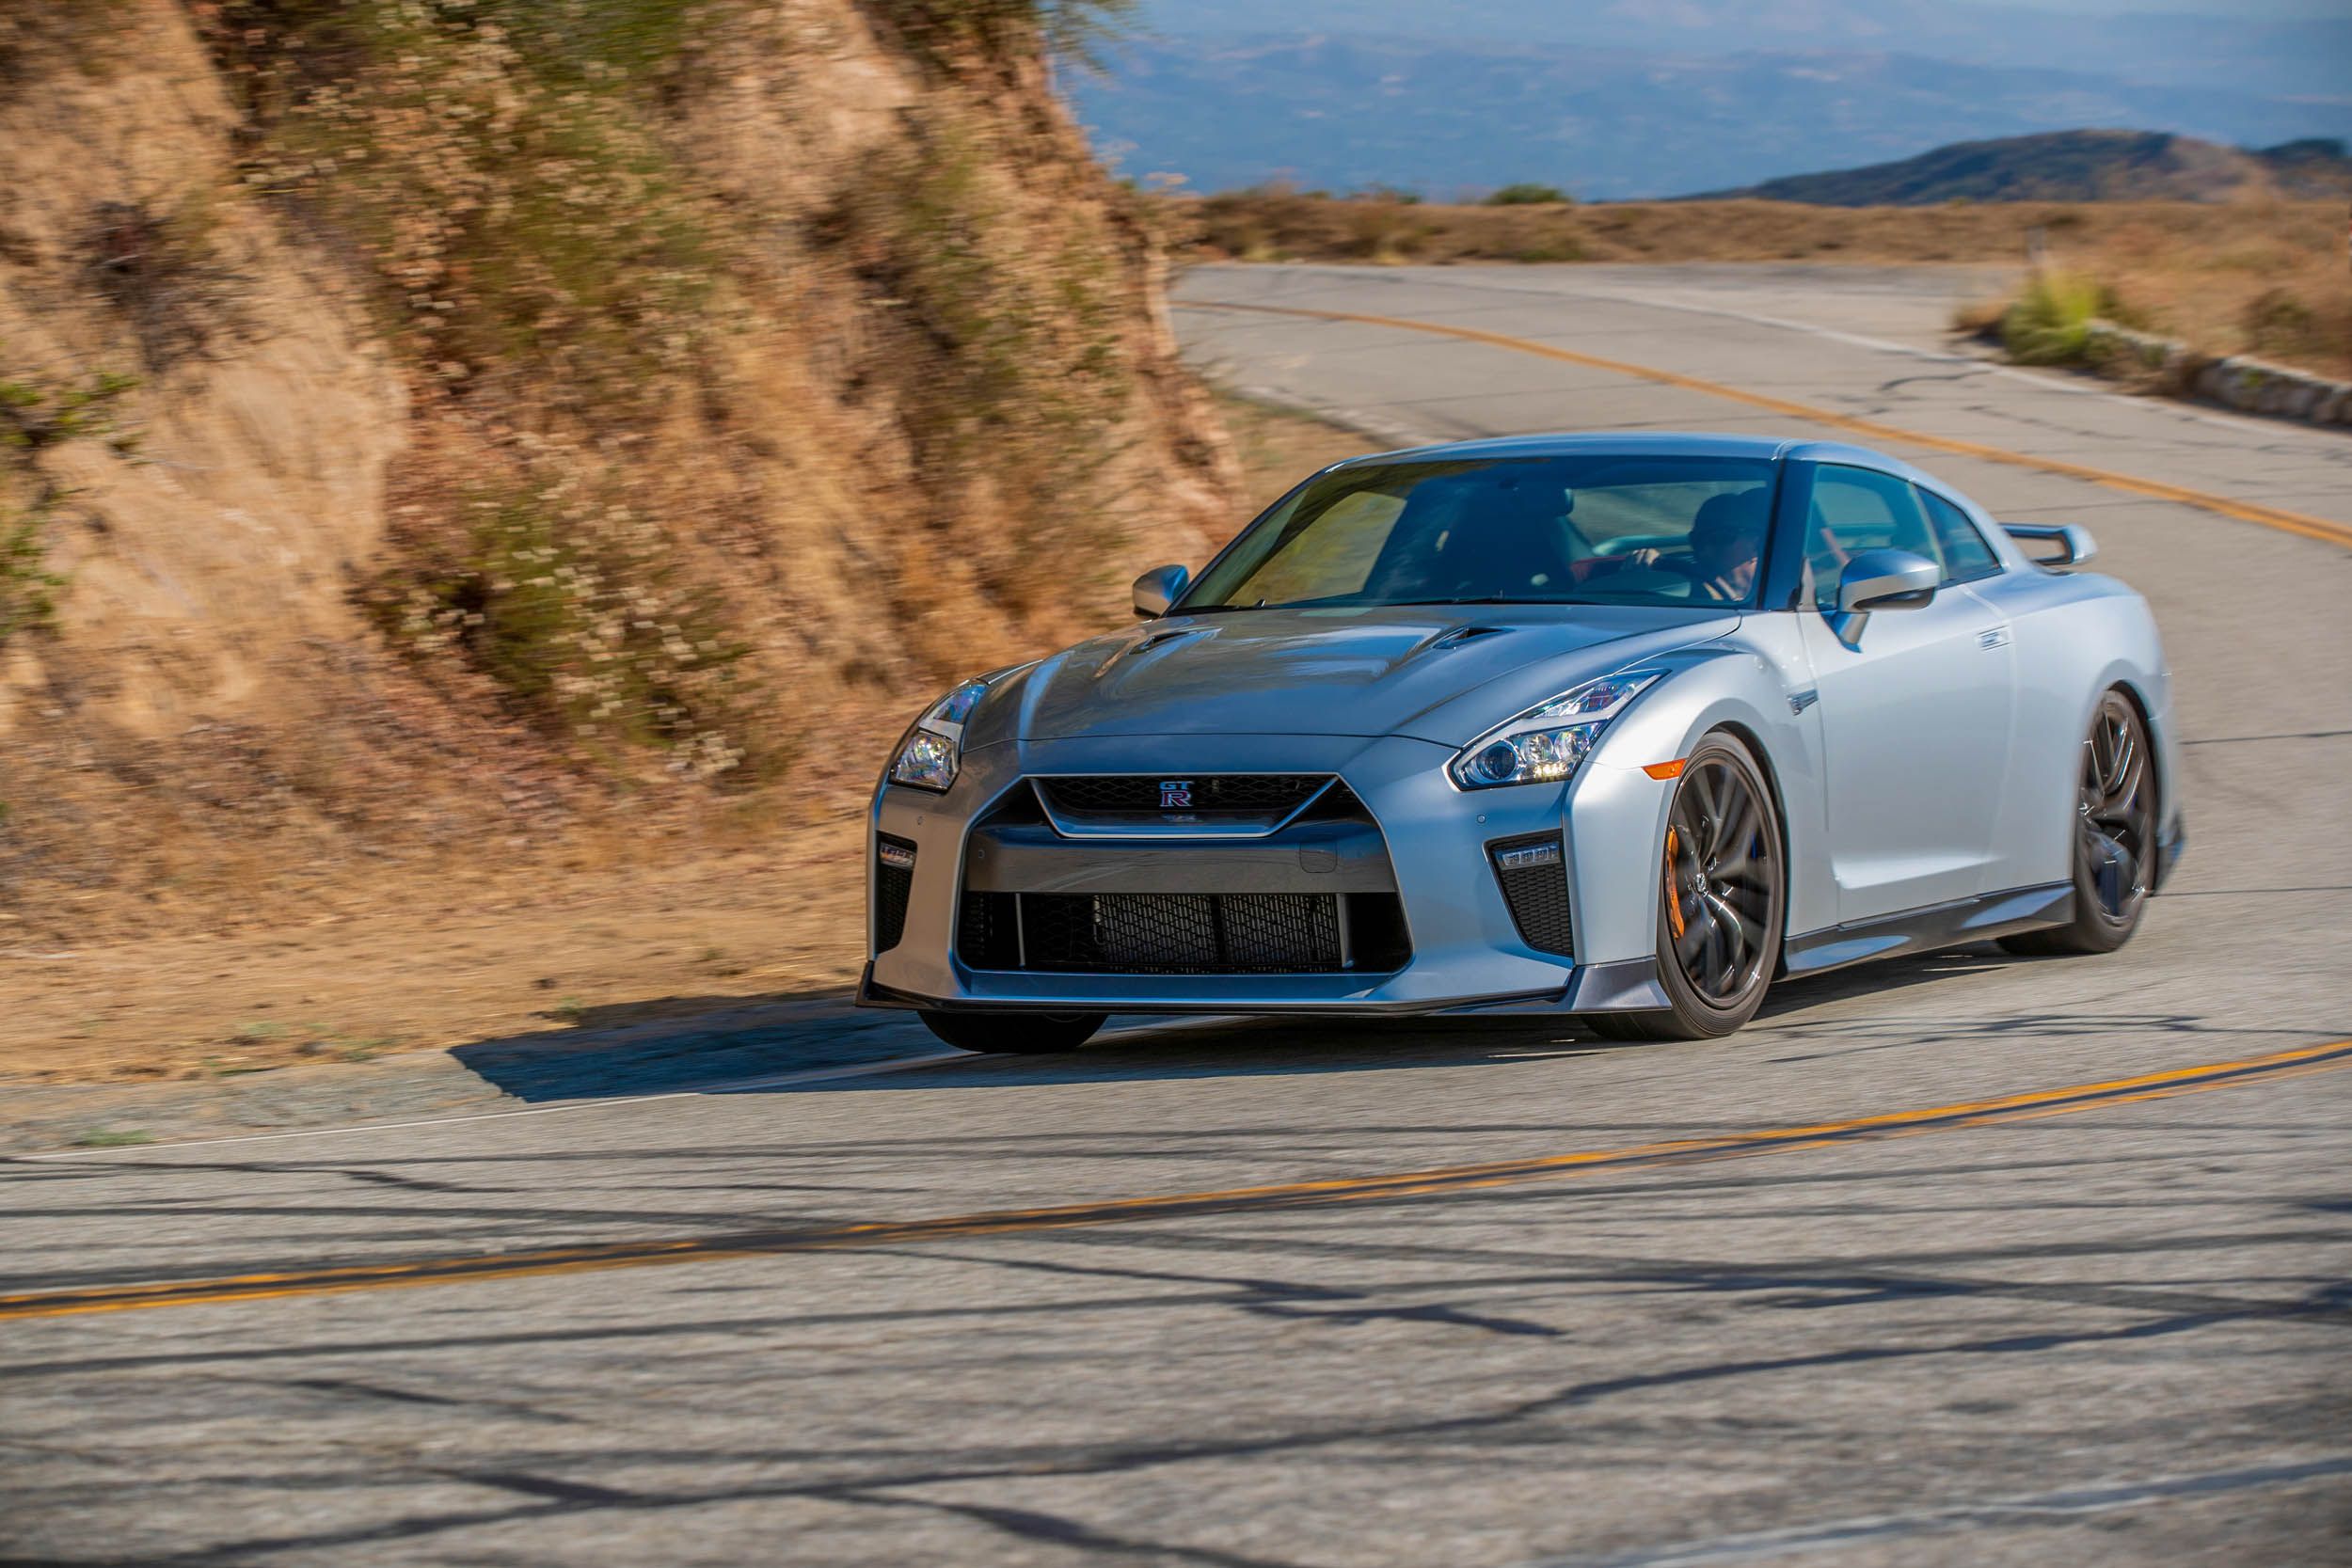 Grey 2019-2020 Nissan GT-R on the road